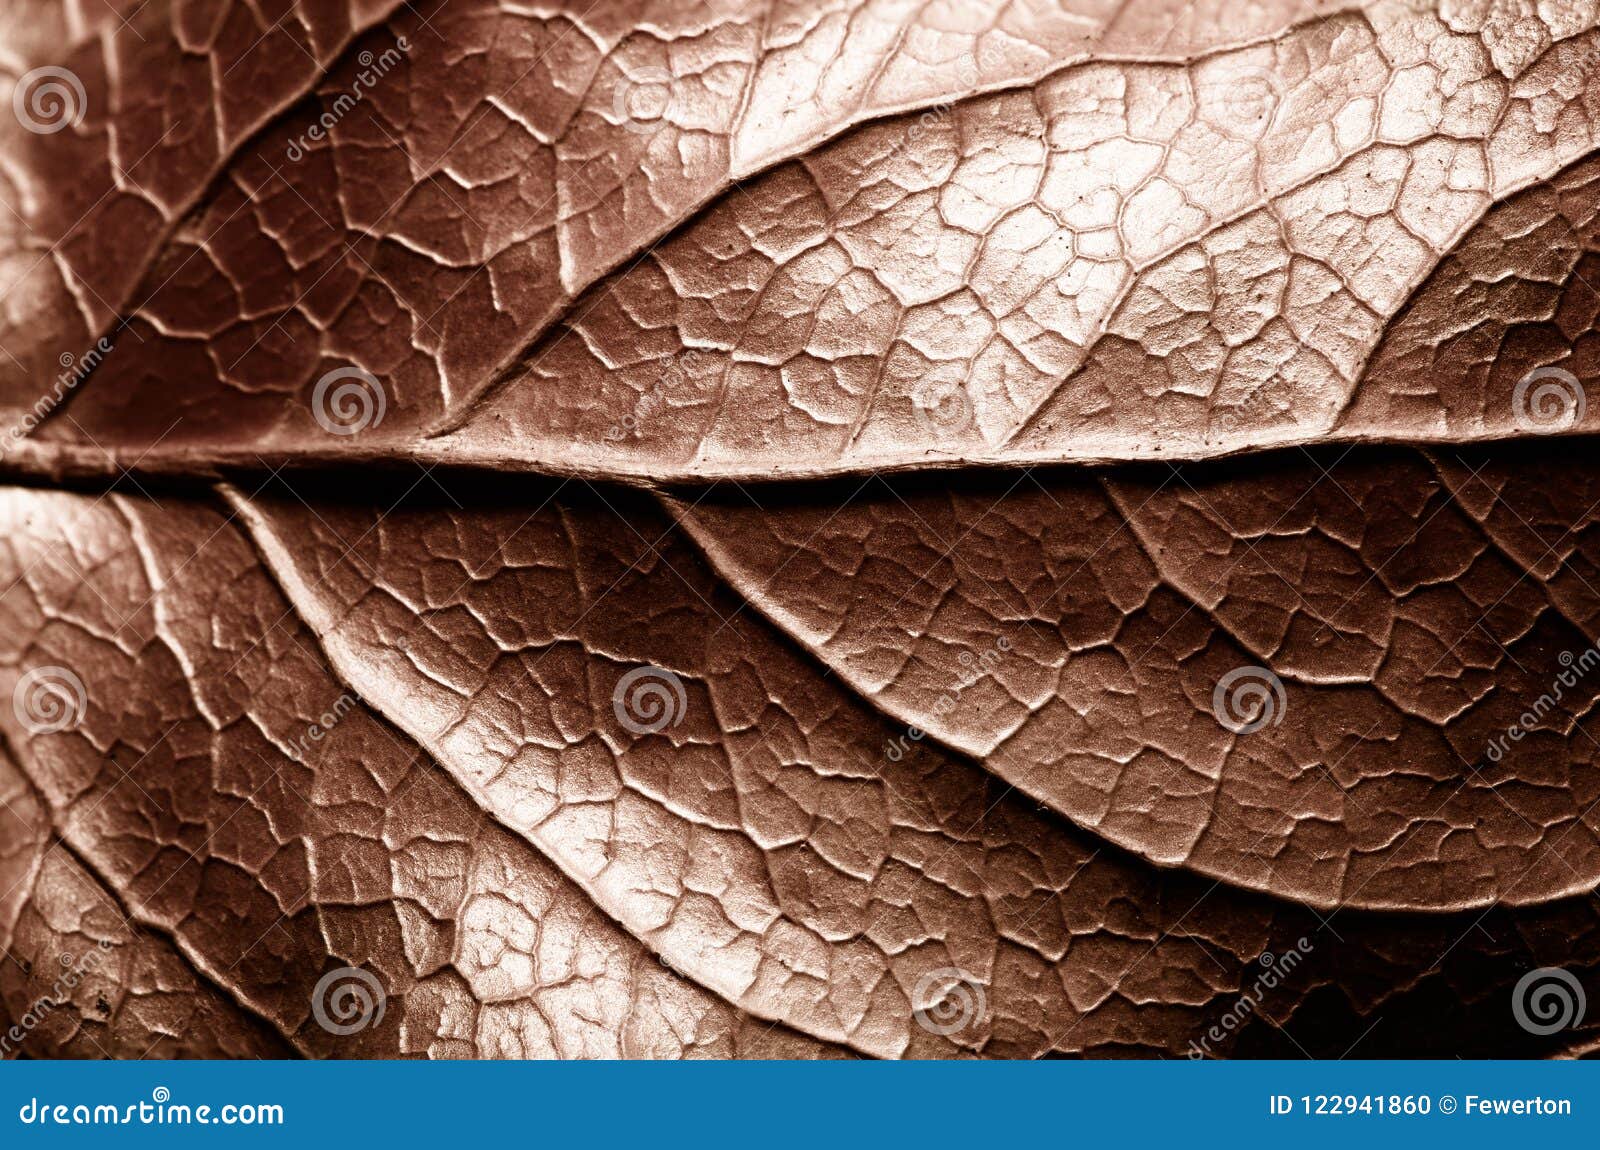 brown sepia toned dry leaf rugged surface structure extreme macro closeup photo with midrib parallel to the frame and visible leaf